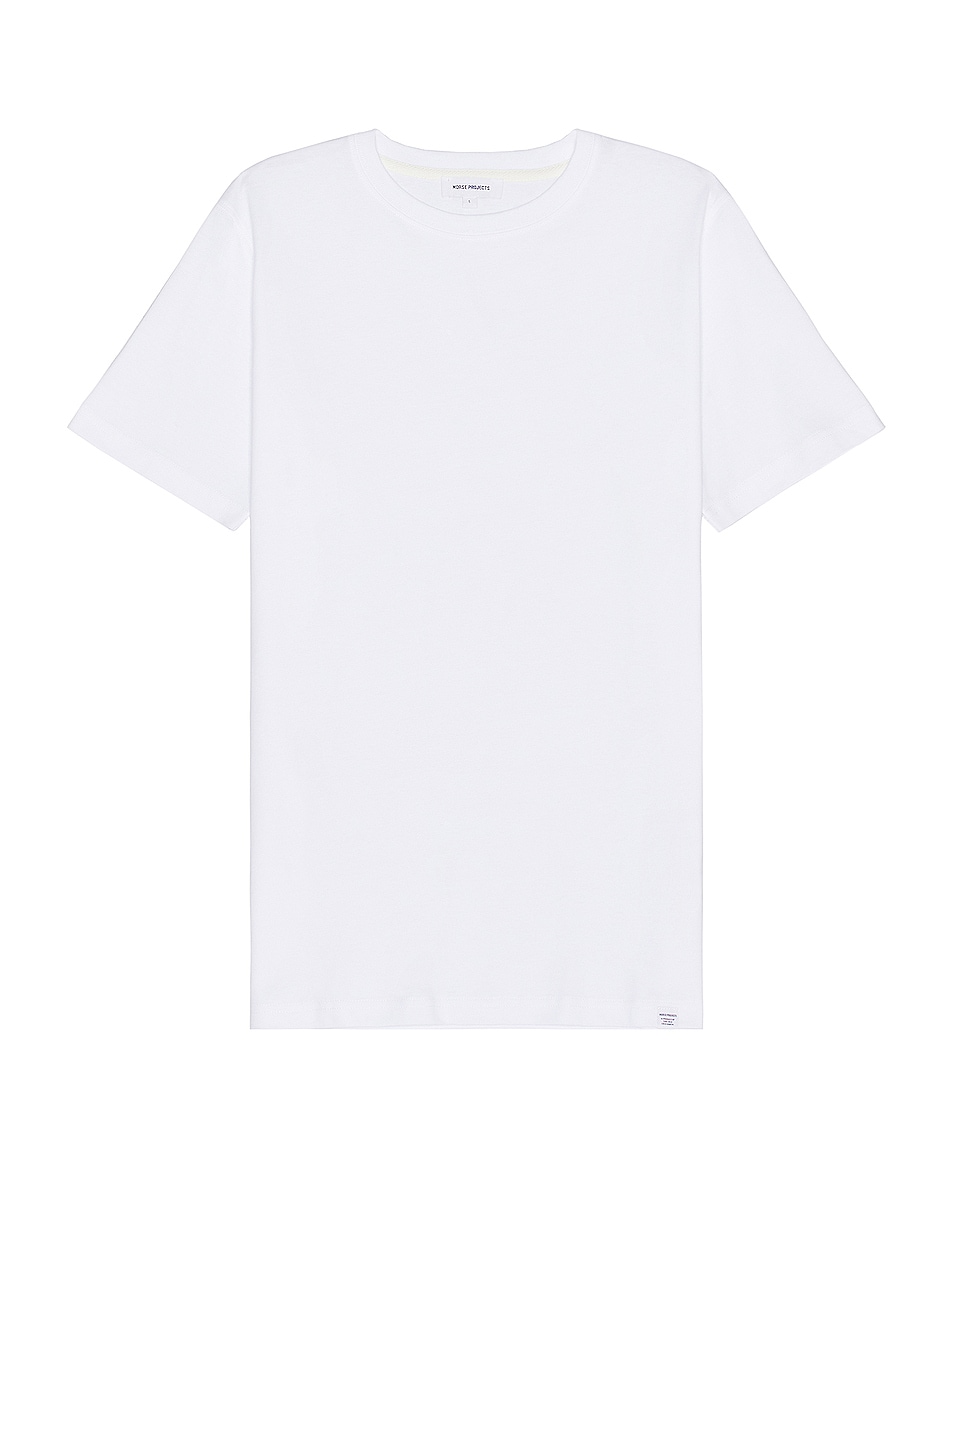 Image 1 of Norse Projects Niels Standard T-shirt in White